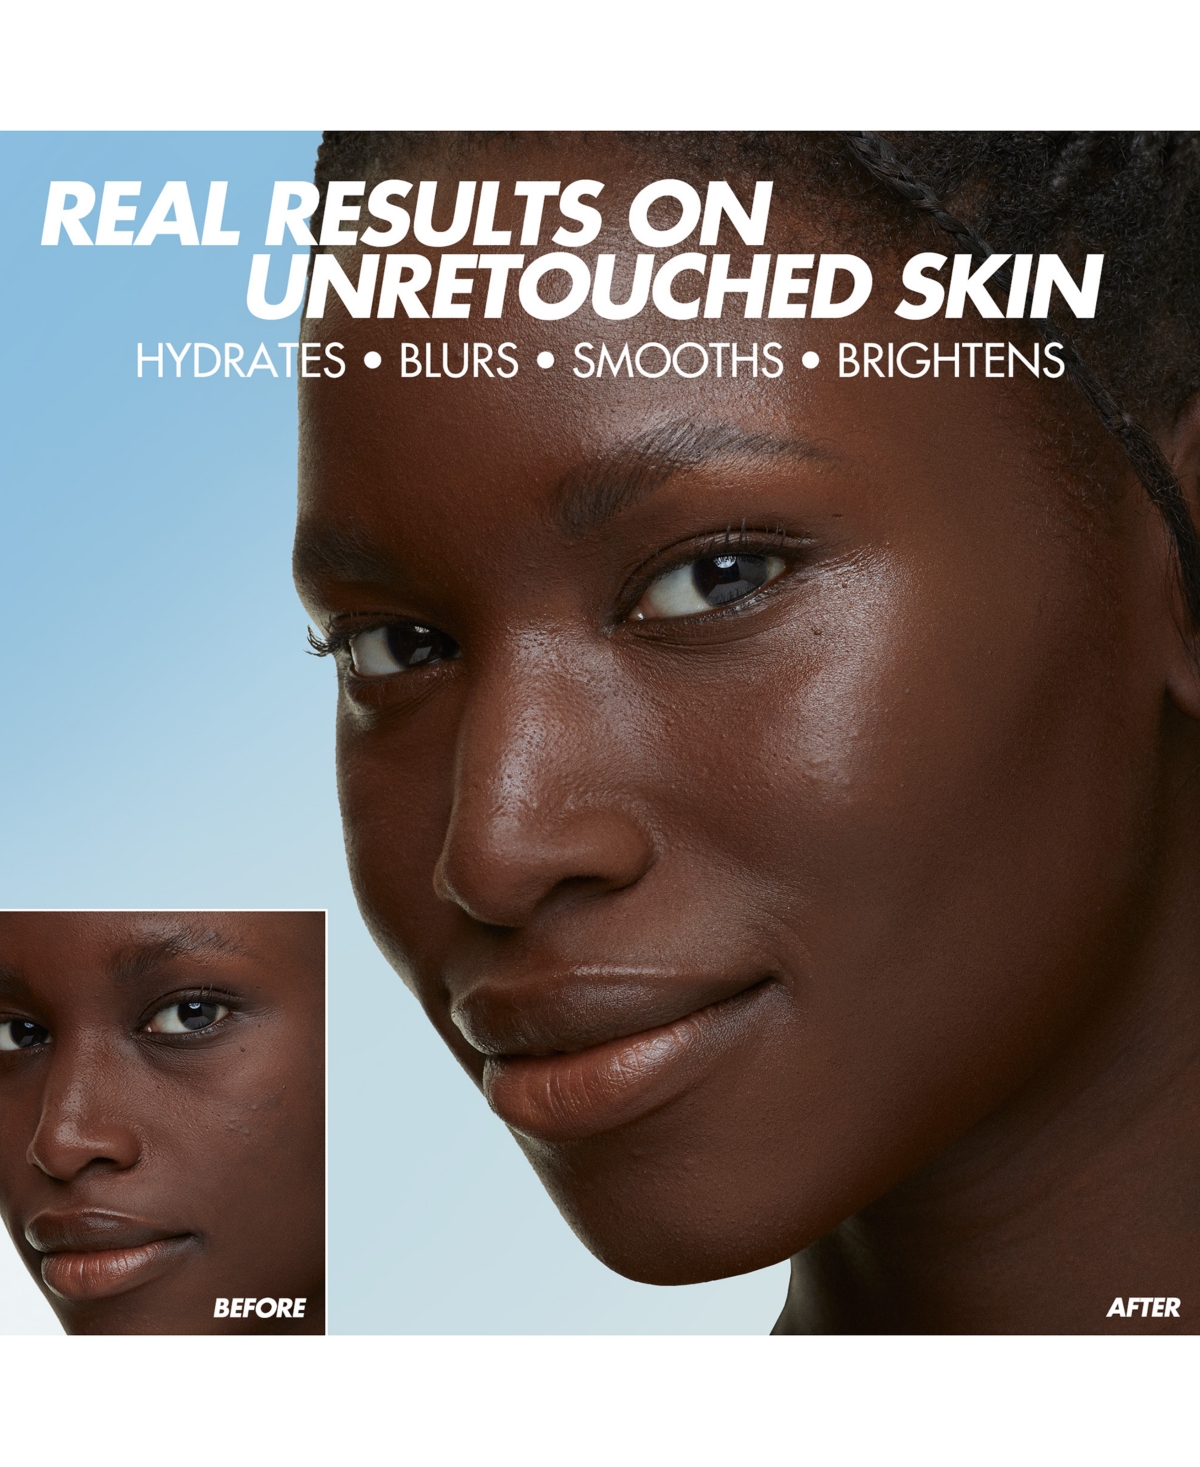 Shop Make Up For Ever Hd Skin Hydra Glow Skincare Foundation With Hyaluronic Acid In Y - Warm Walnutâ - For Deep Skin With Y